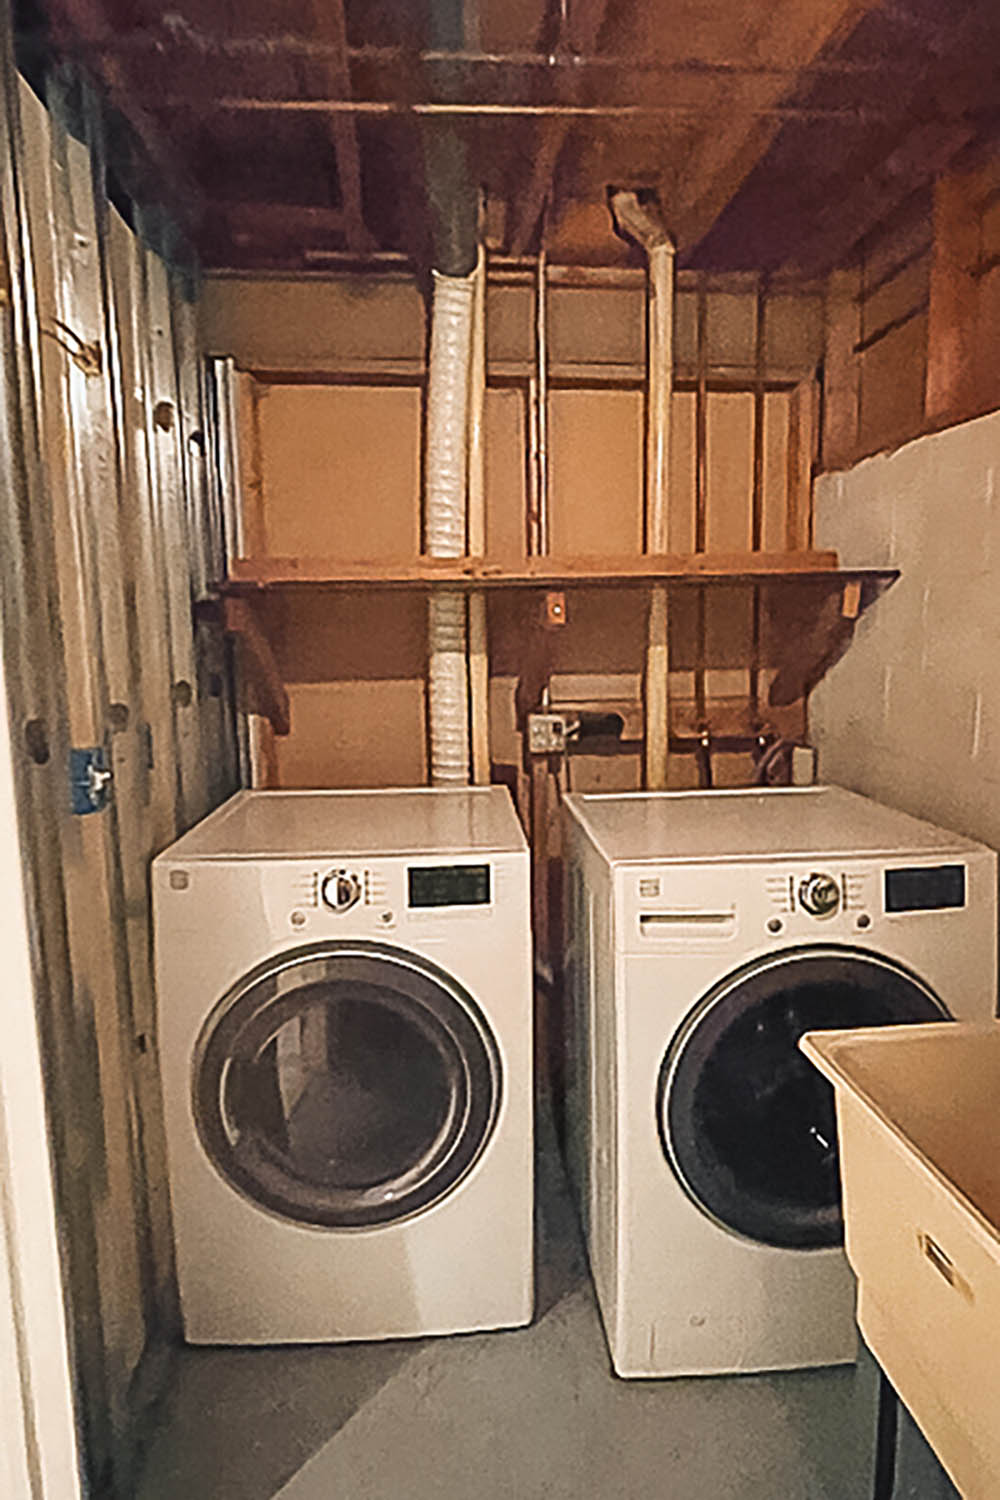 Laundry Room Makeover Ideas - The Home Depot